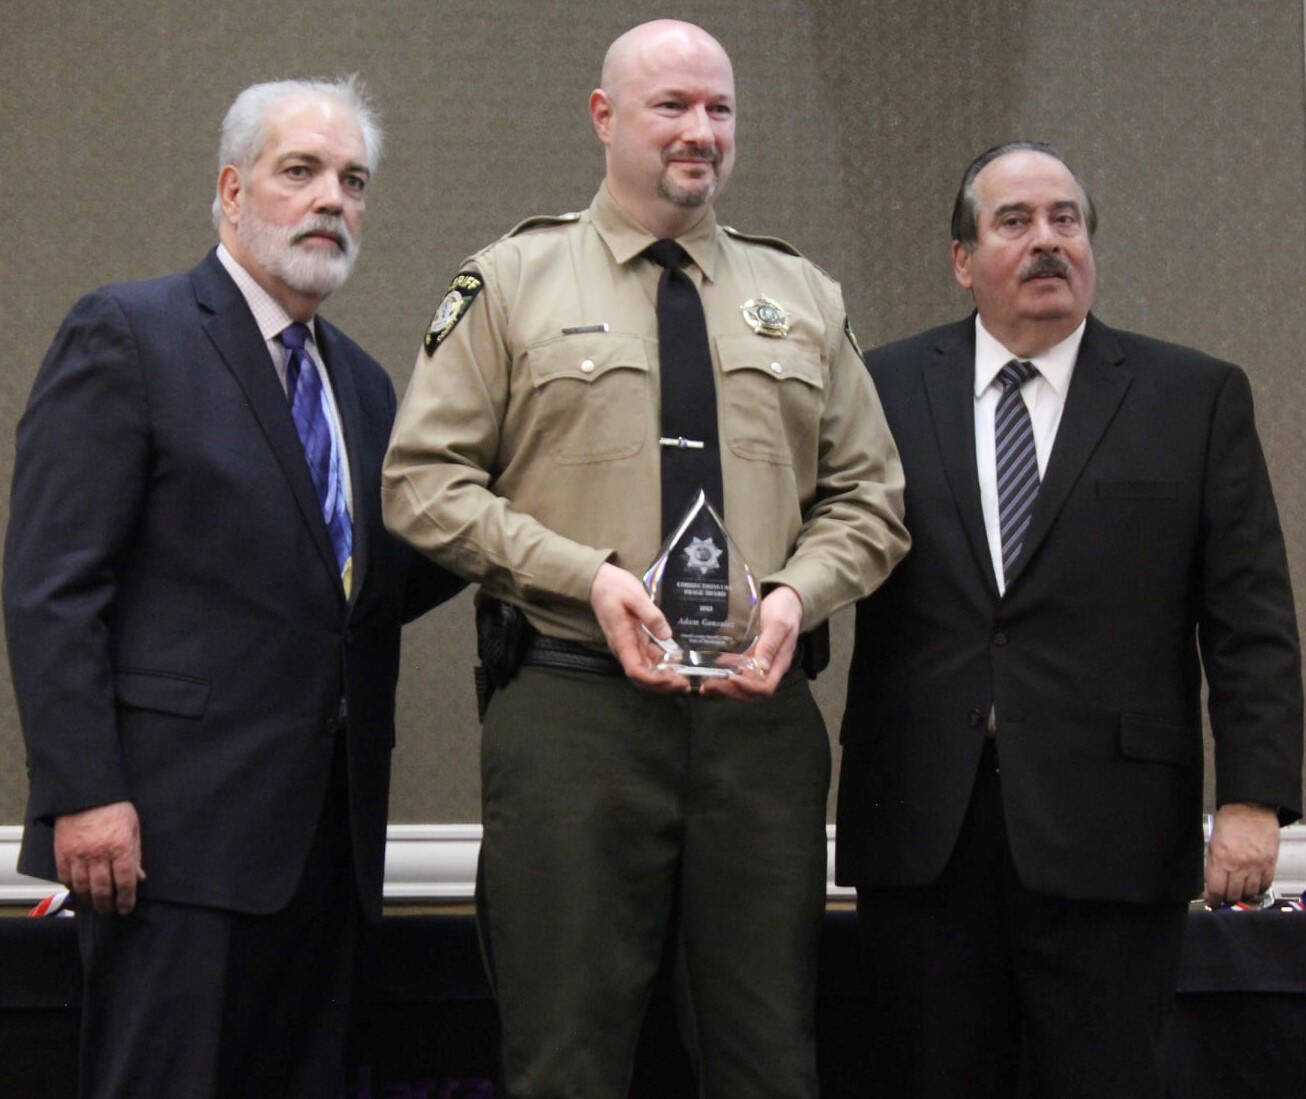 Photo provided
Deputy Adam Gonzalez, center, is pictured with Corrections USA Vice Chairman Roy Pinto, left, and Corrections USA President Jim Baiardi, right, during the awards banquet on Wednesday Feb. 16, where he was awarded the Corrections USA Image Award.